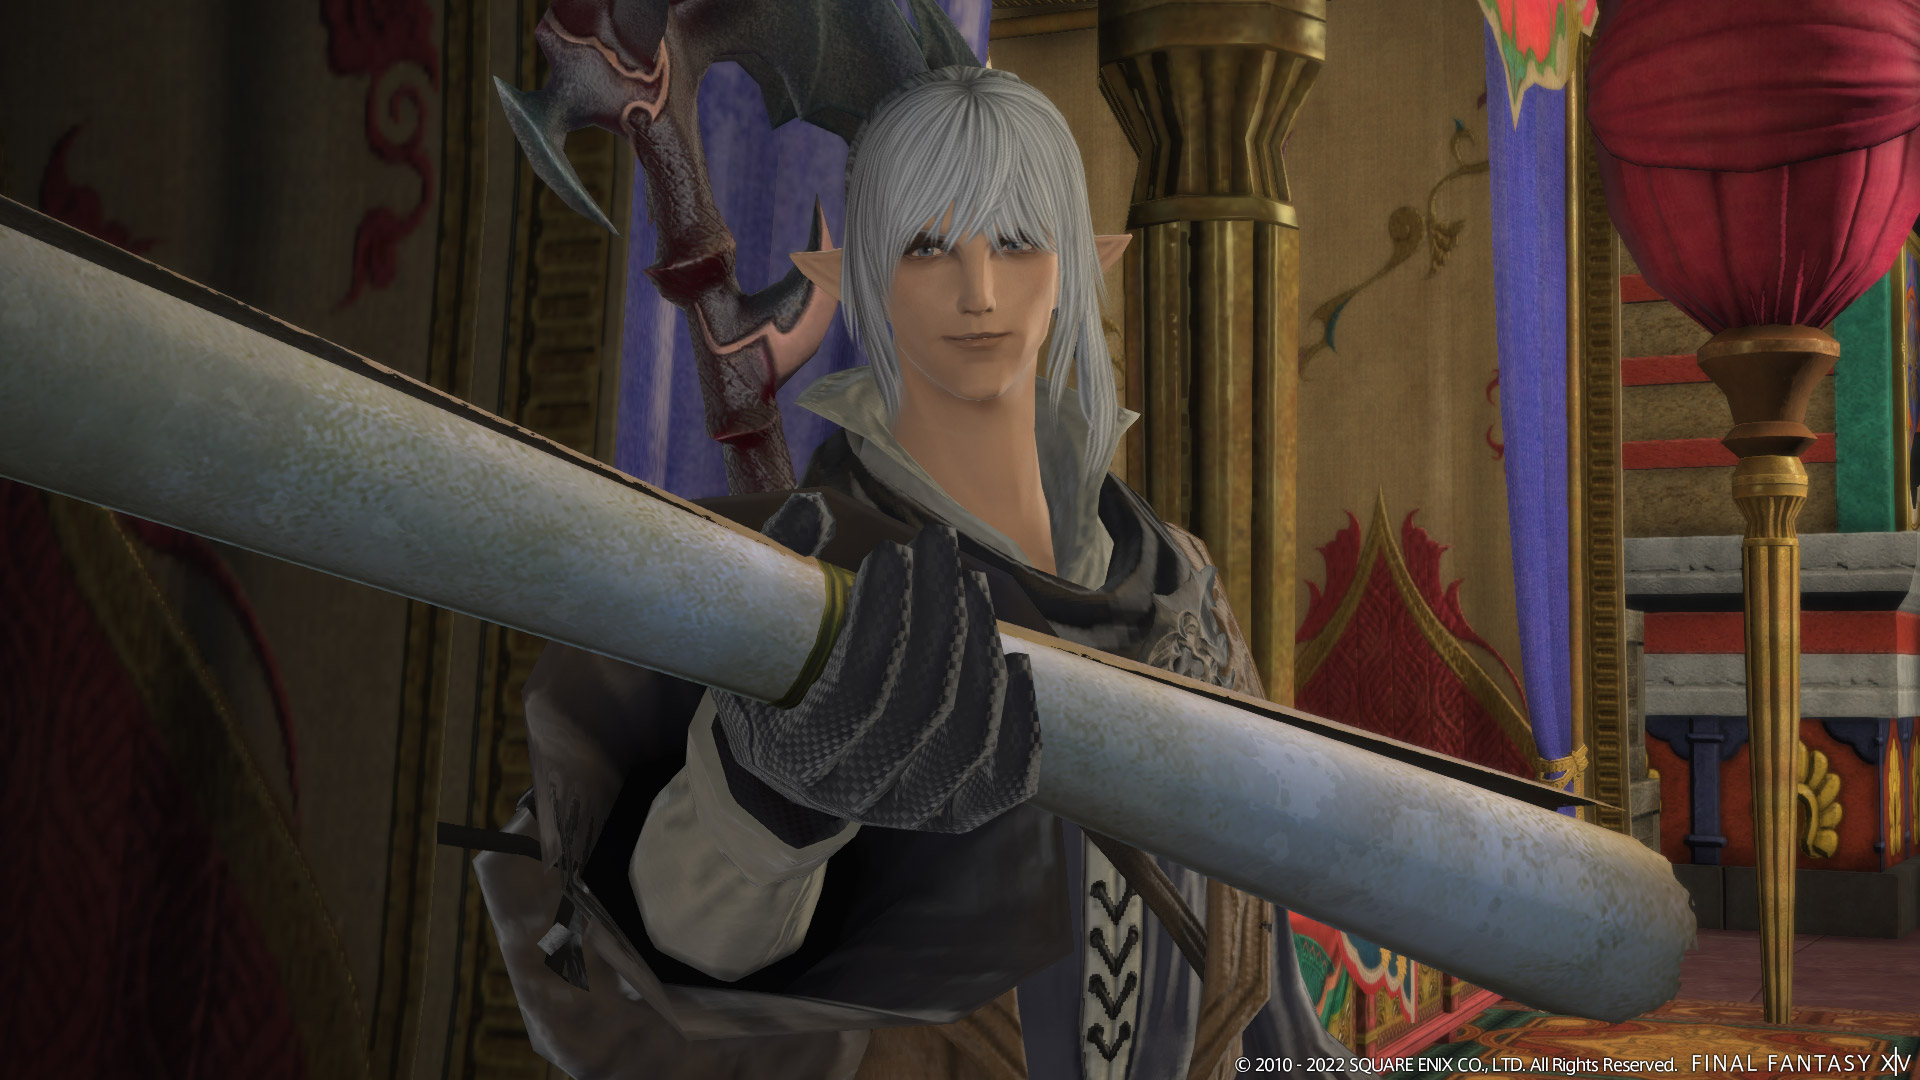 Final Fantasy 14’s housing lottery errors have now been fixed